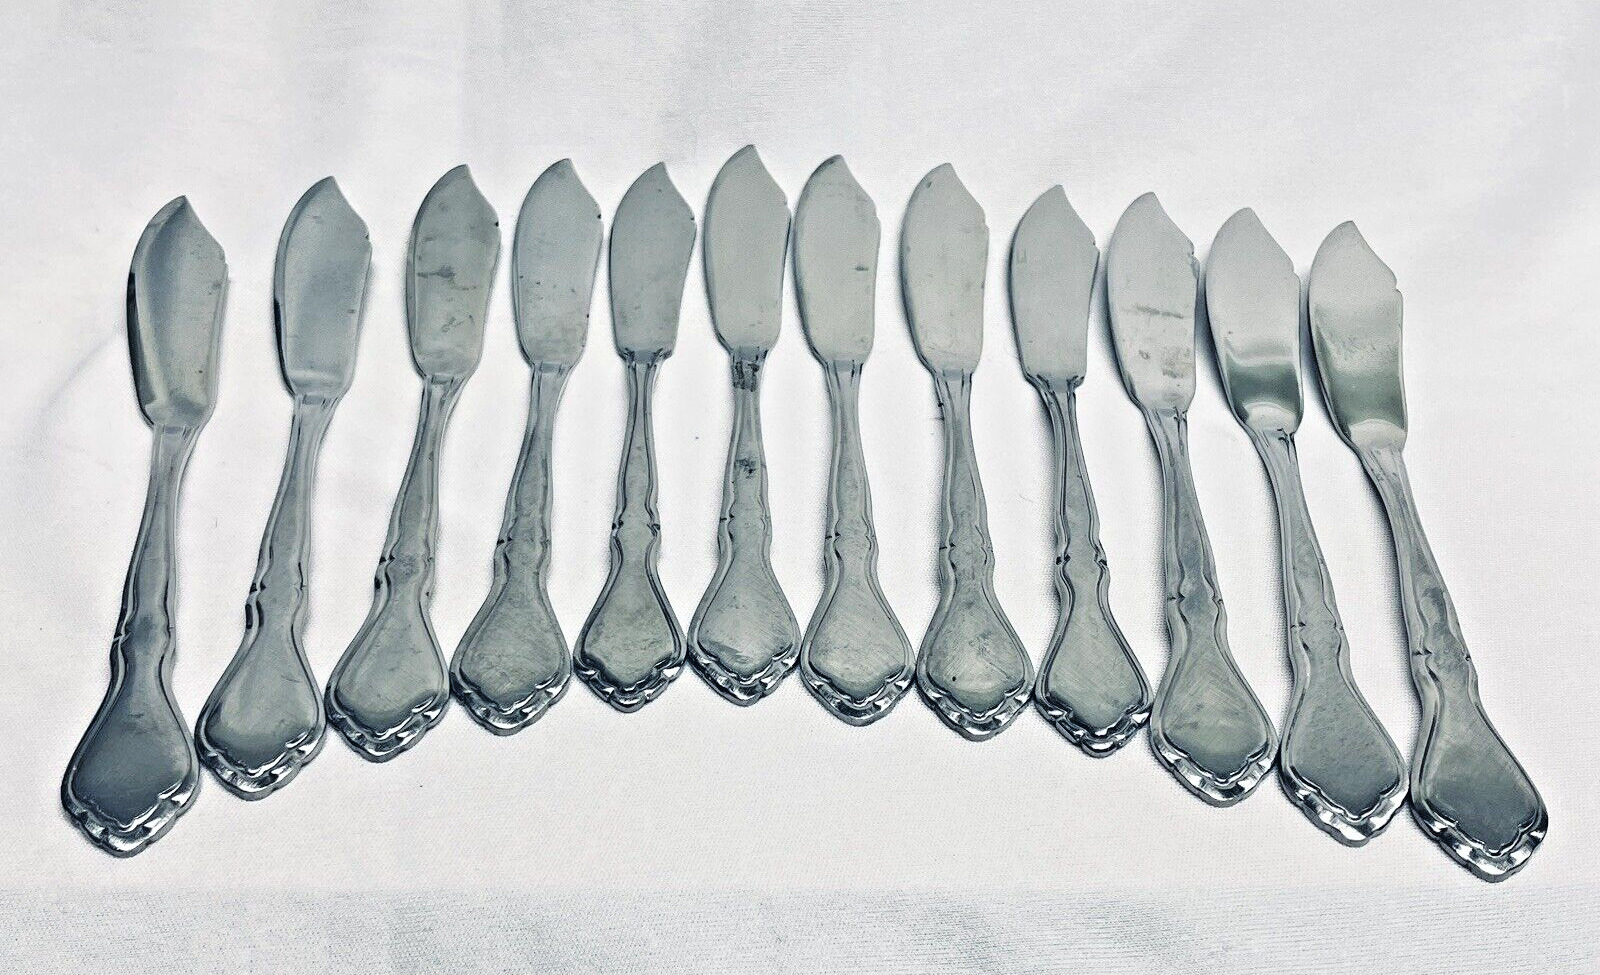 WF Washington Forge Stainless SPRING MEADOW Lot of 12 Fish Knives Butter Knives